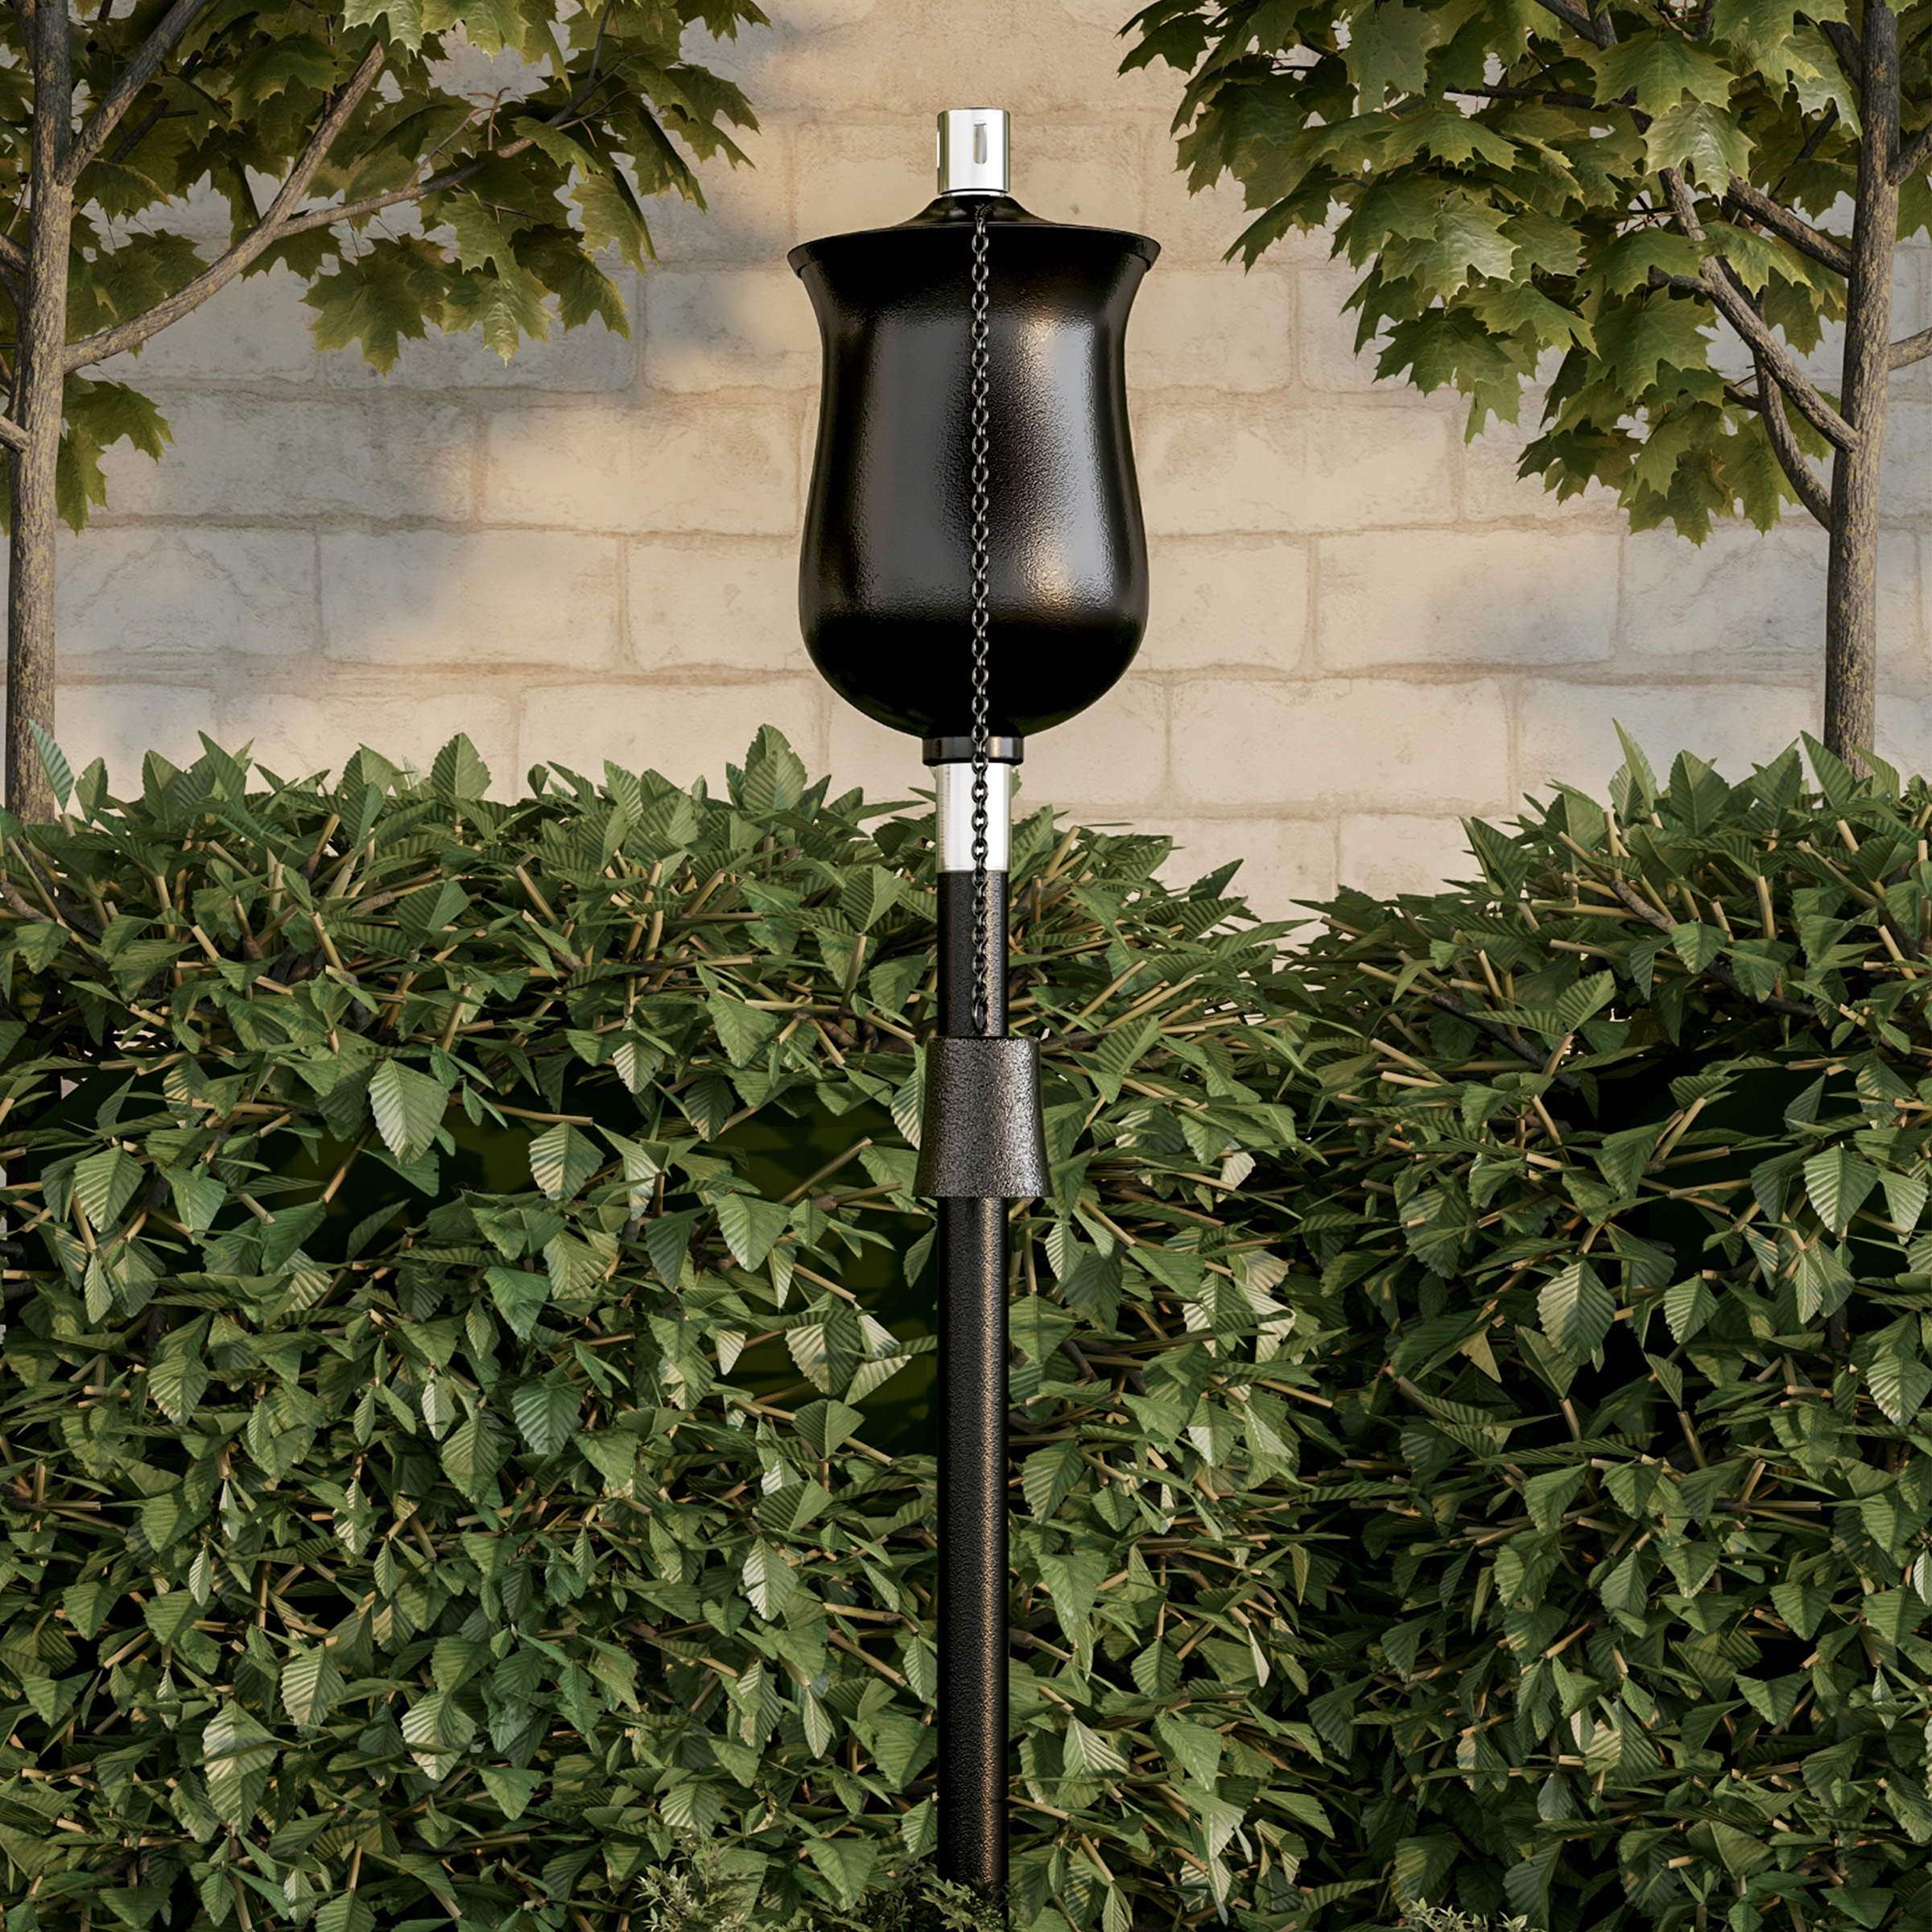 Outdoor Torch Lamp- 45” Black Metal Fuel Canister Flame Light For Citronella With Fiberglass Wick, Adjustable Height